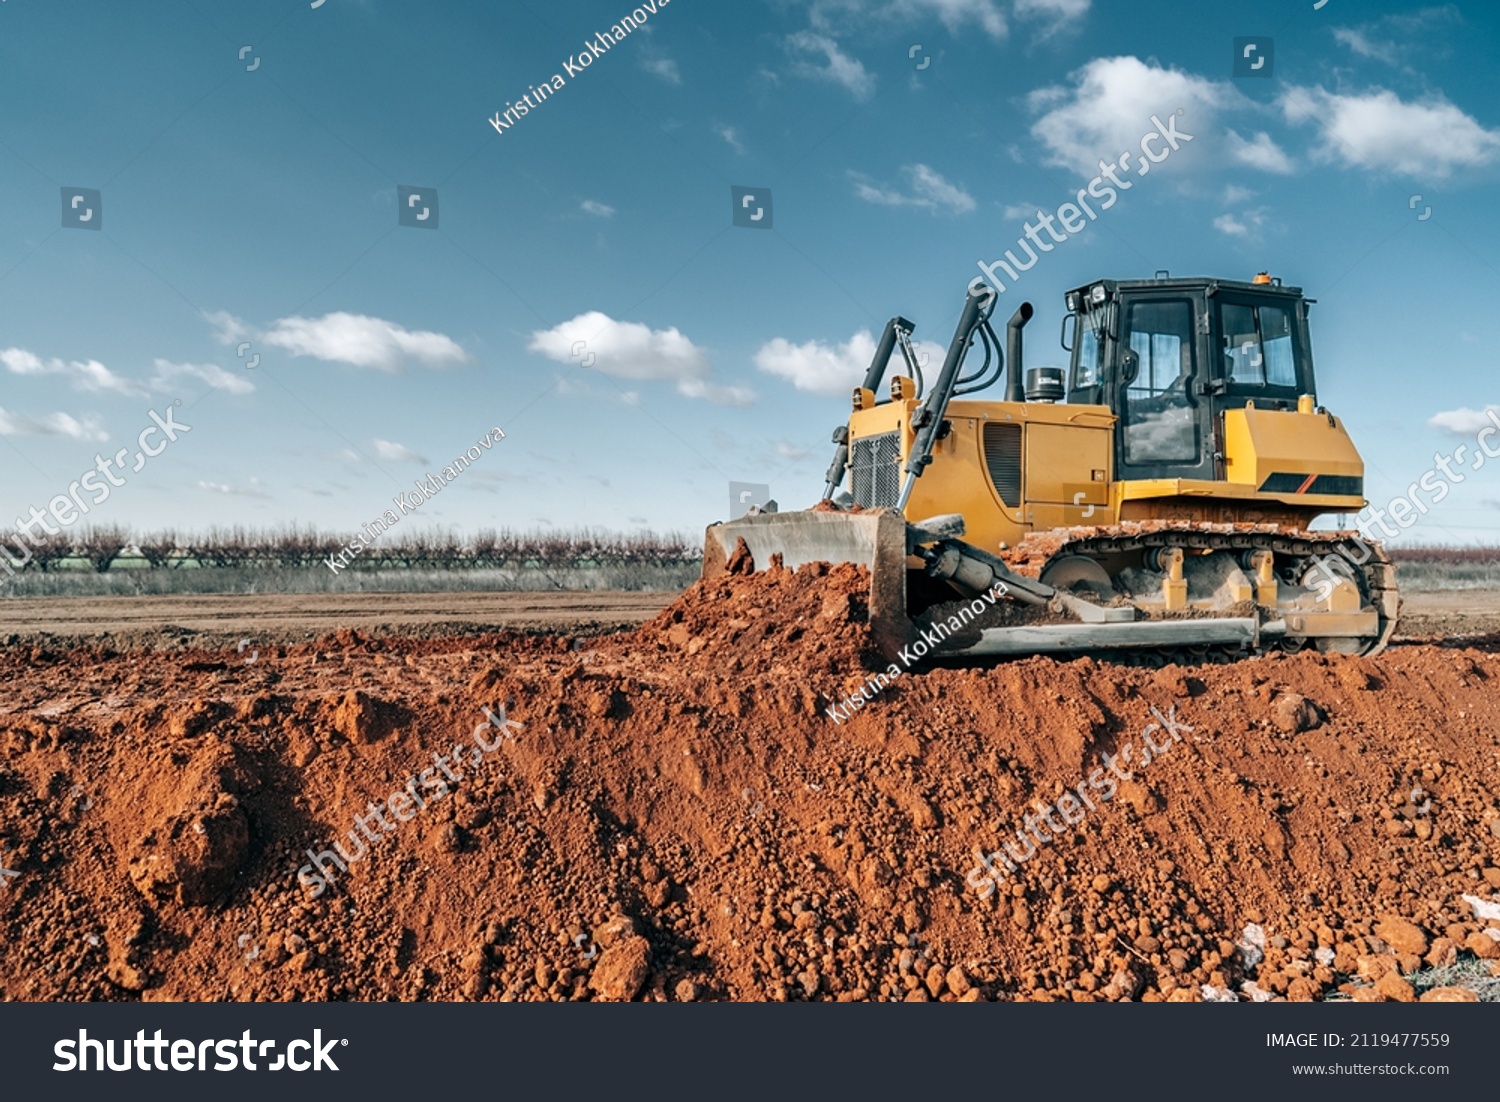 Crawler bulldozer working on construction site or quarry. Mining machinery moving clay, smoothing gravel surface for new road. Earthmoving, excavations, digging on soils. #2119477559